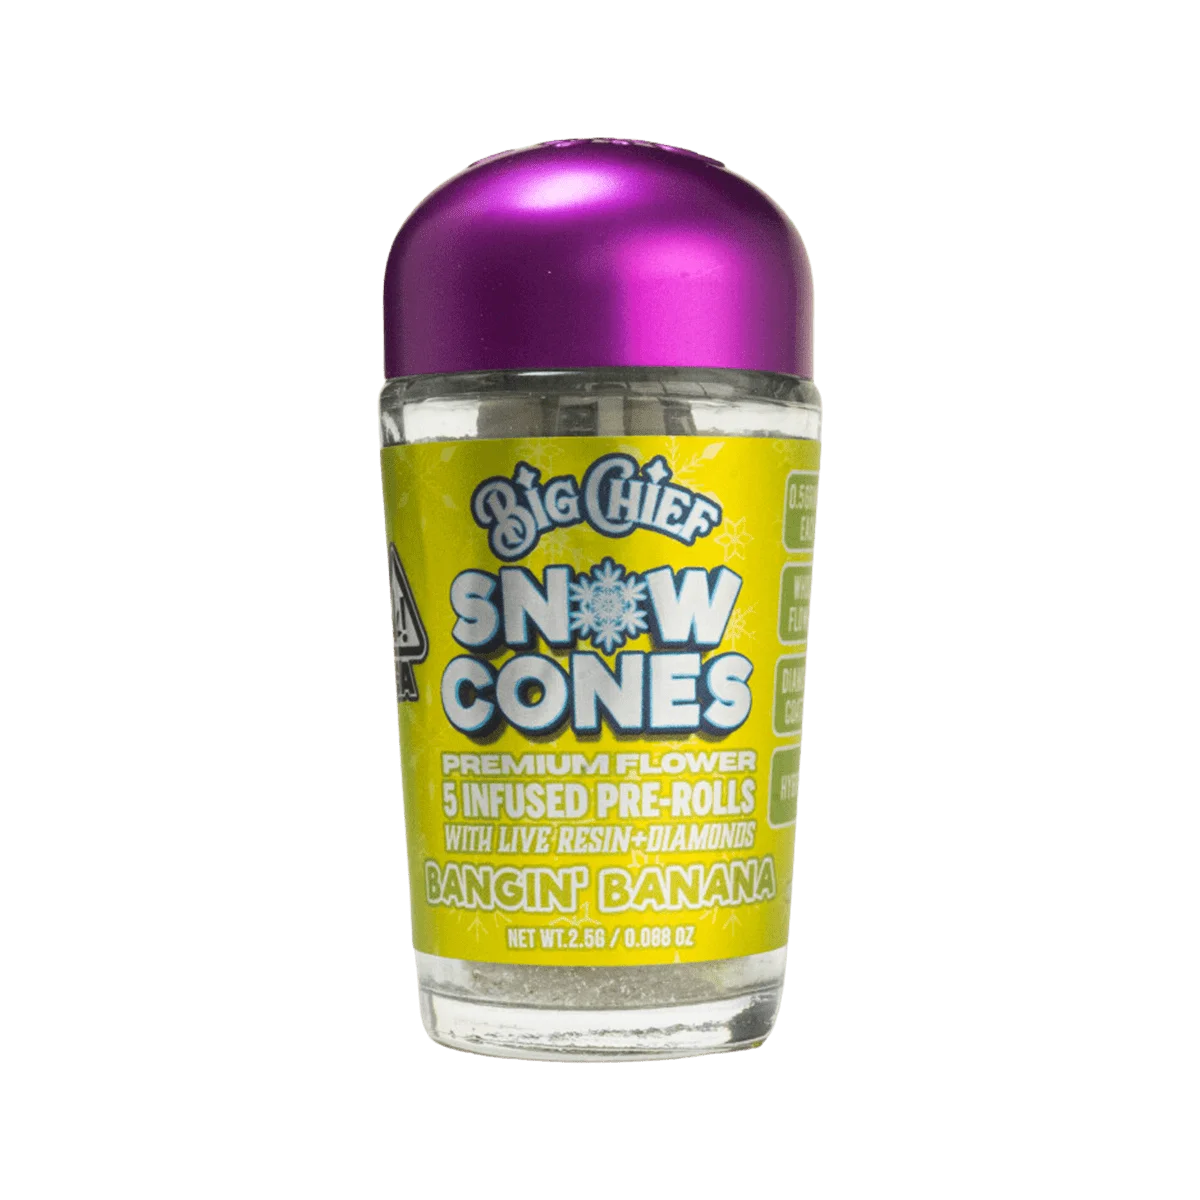 Big Chief Snow Cone Infused Pre-Rolls - Banging Banana